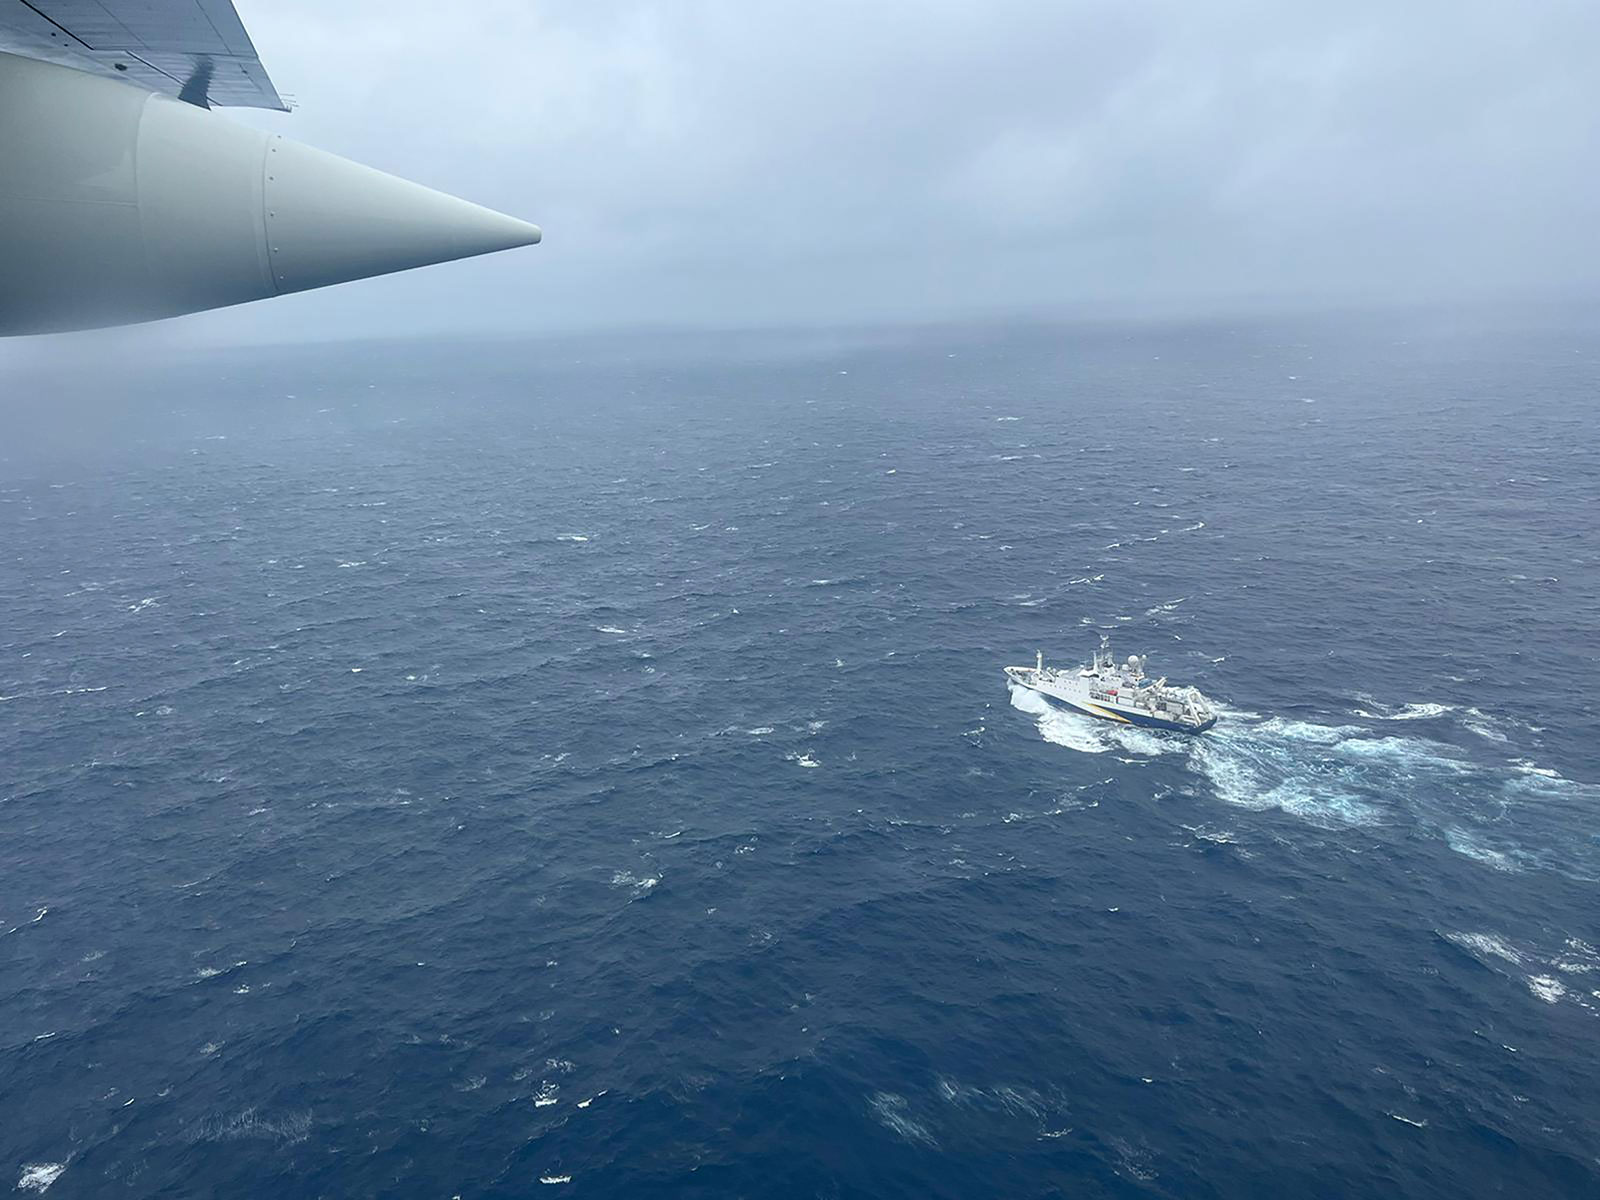 A Coast Guard HC-130 Hercules airplane flies over French research vessel L’Atalante about 900 miles east of Cape Cod during the search for the Titan submersible on June 21.